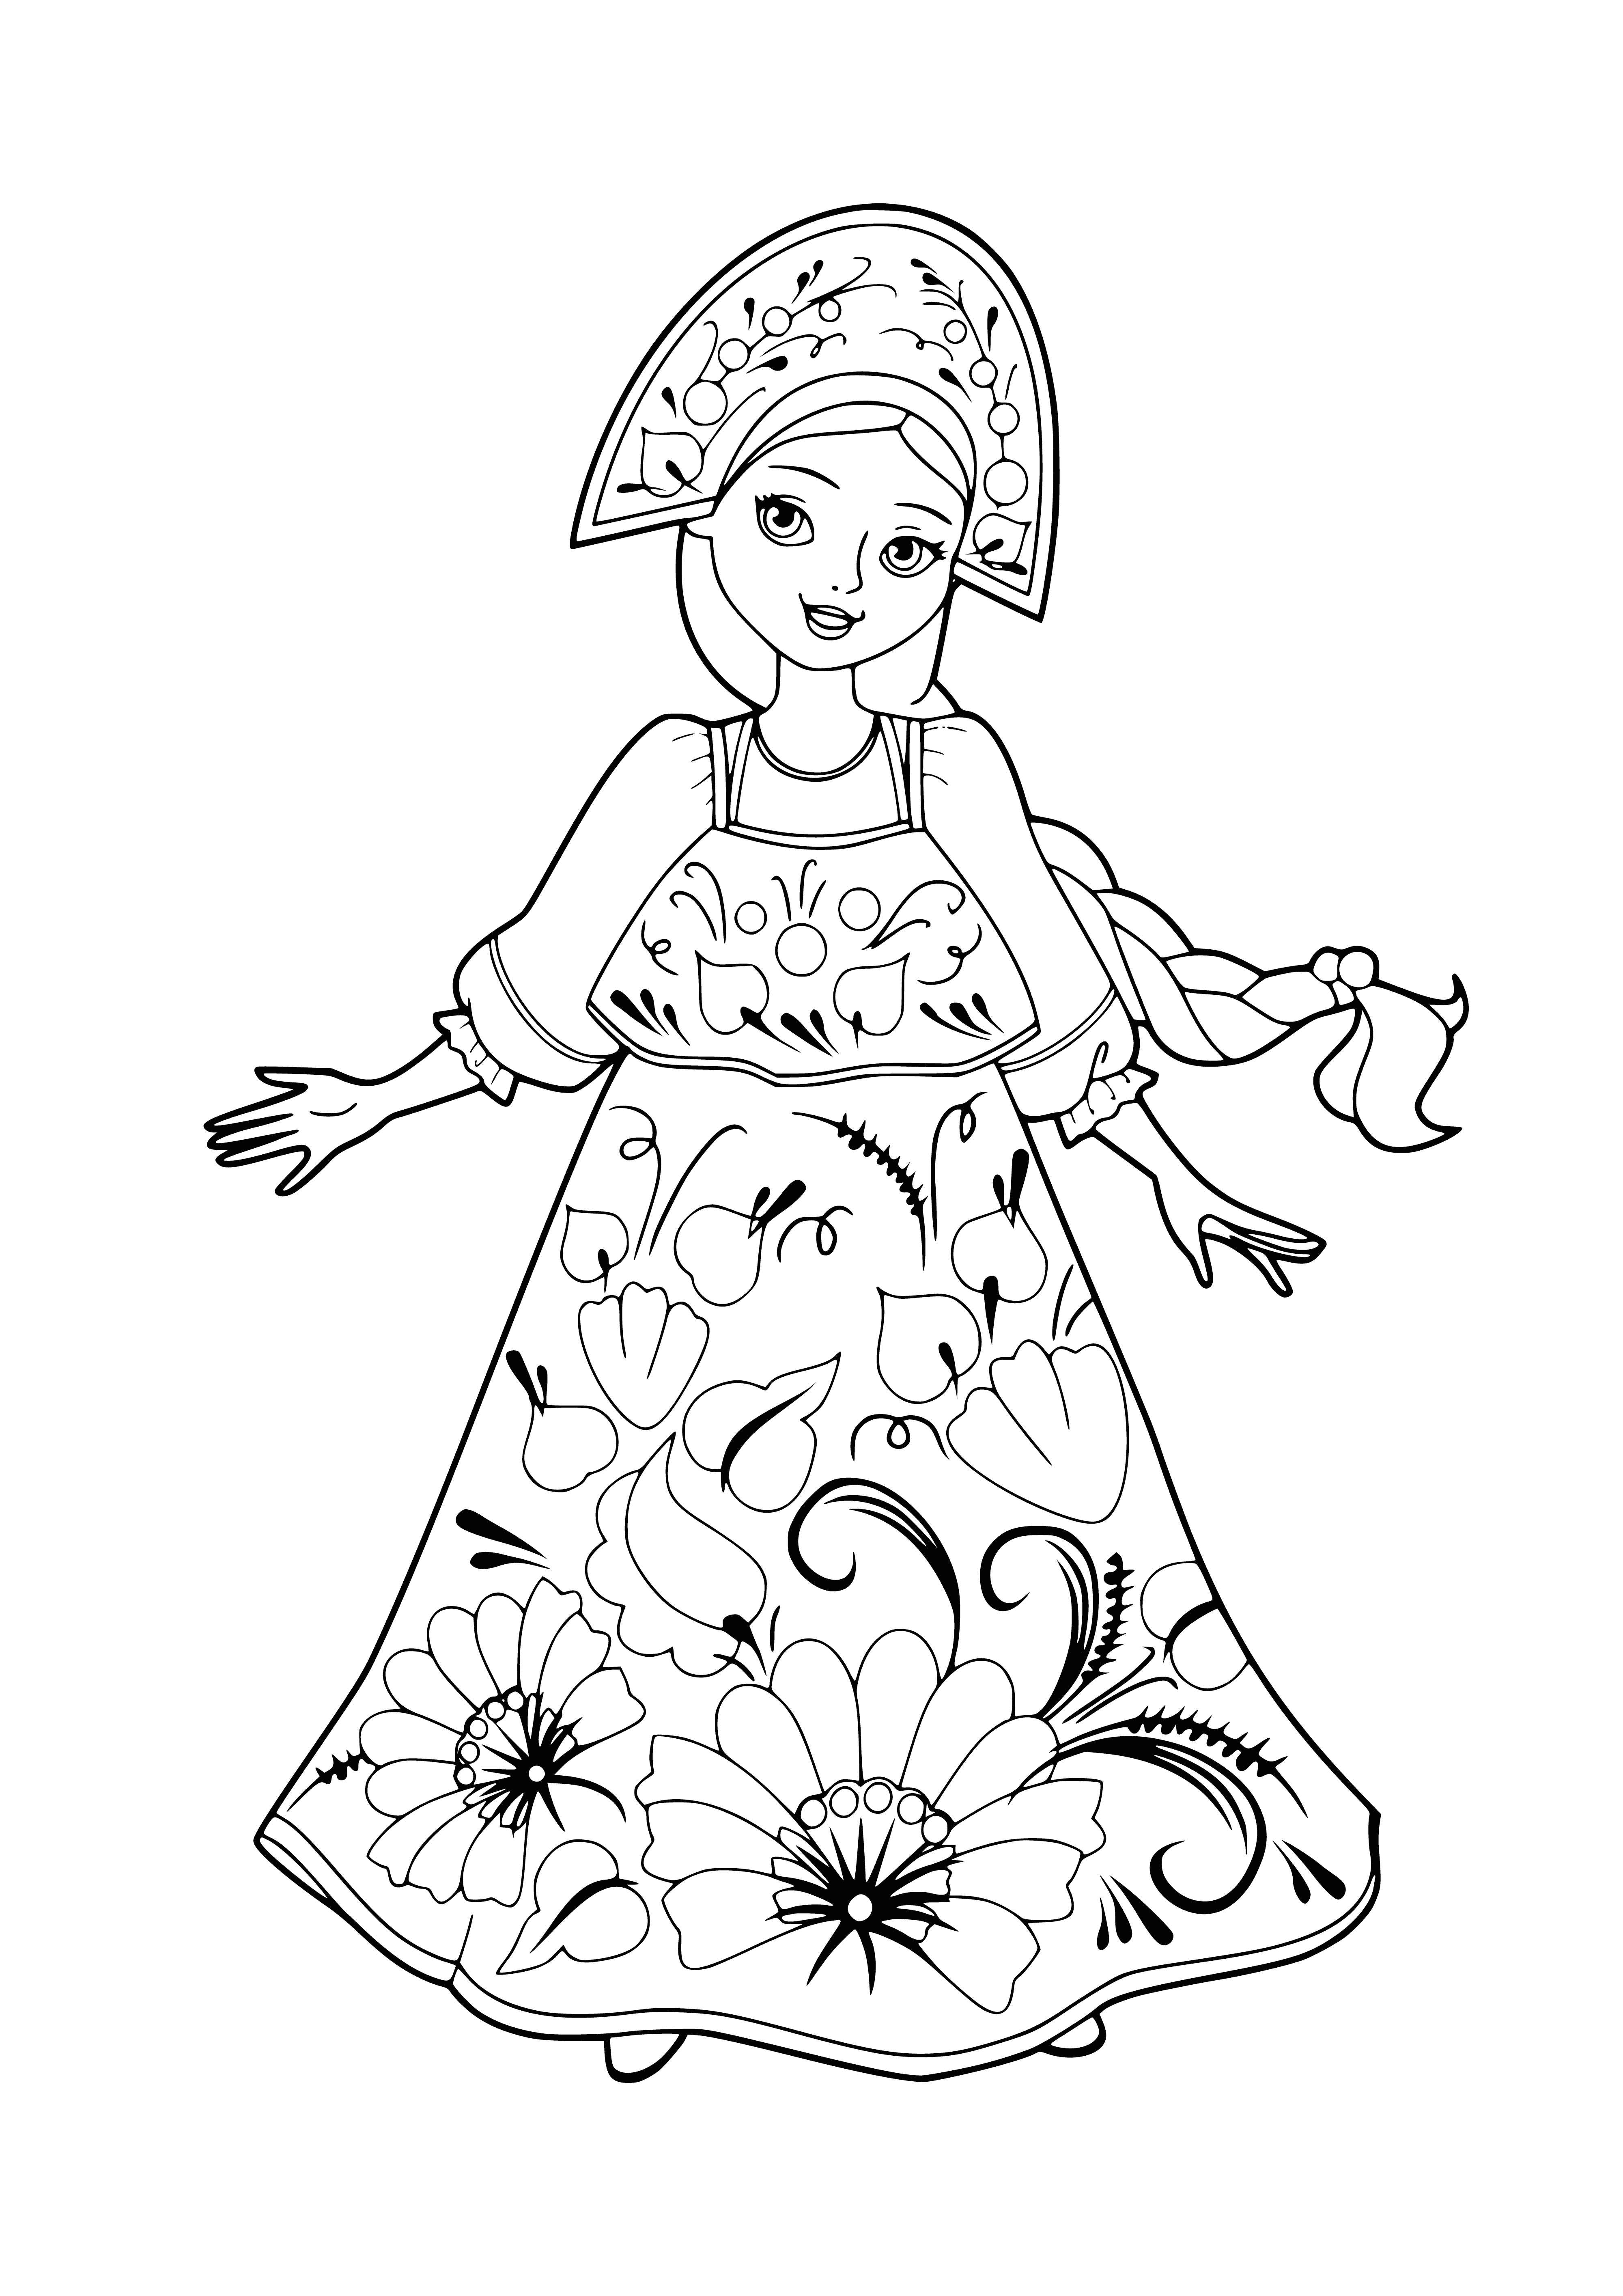 coloring page: Three beauties in traditional Russian kokoshnik headdresses in front of a floral background. Colors, sashes, and hair/eye variations.